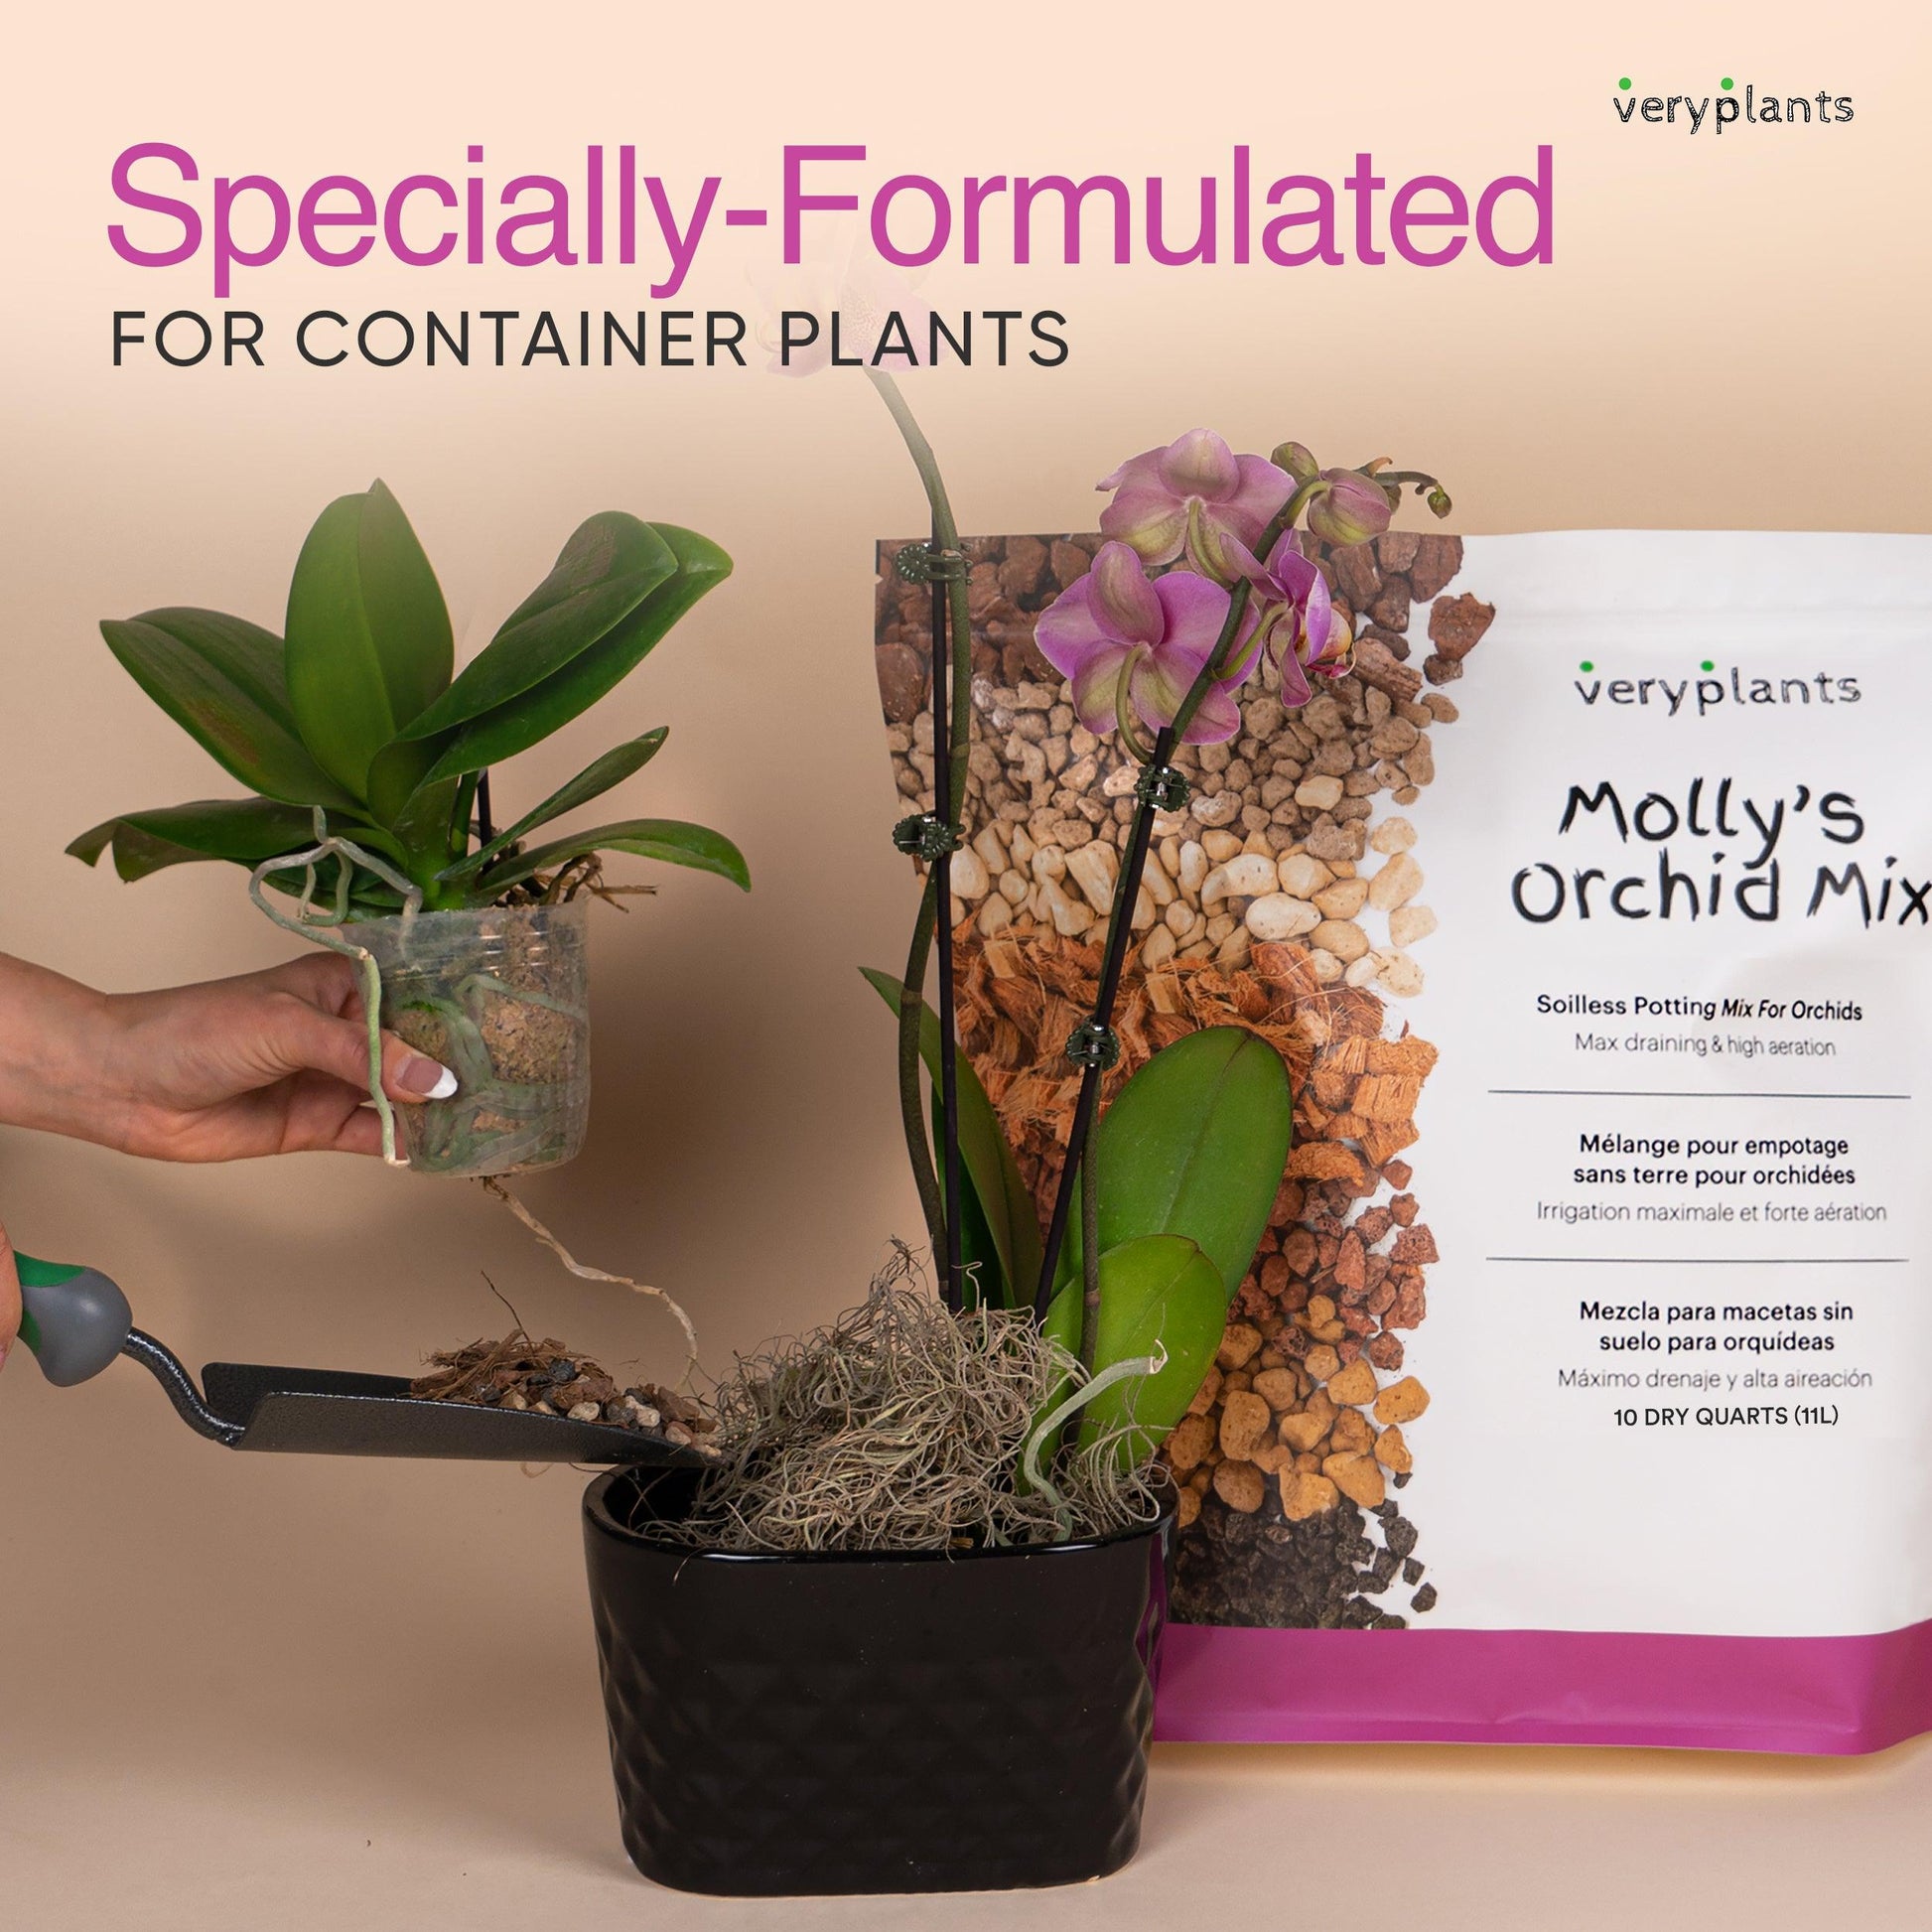 Molly's Orchid Mix - Premium Soilless Orchid Potting Mix - VERYPLANTS